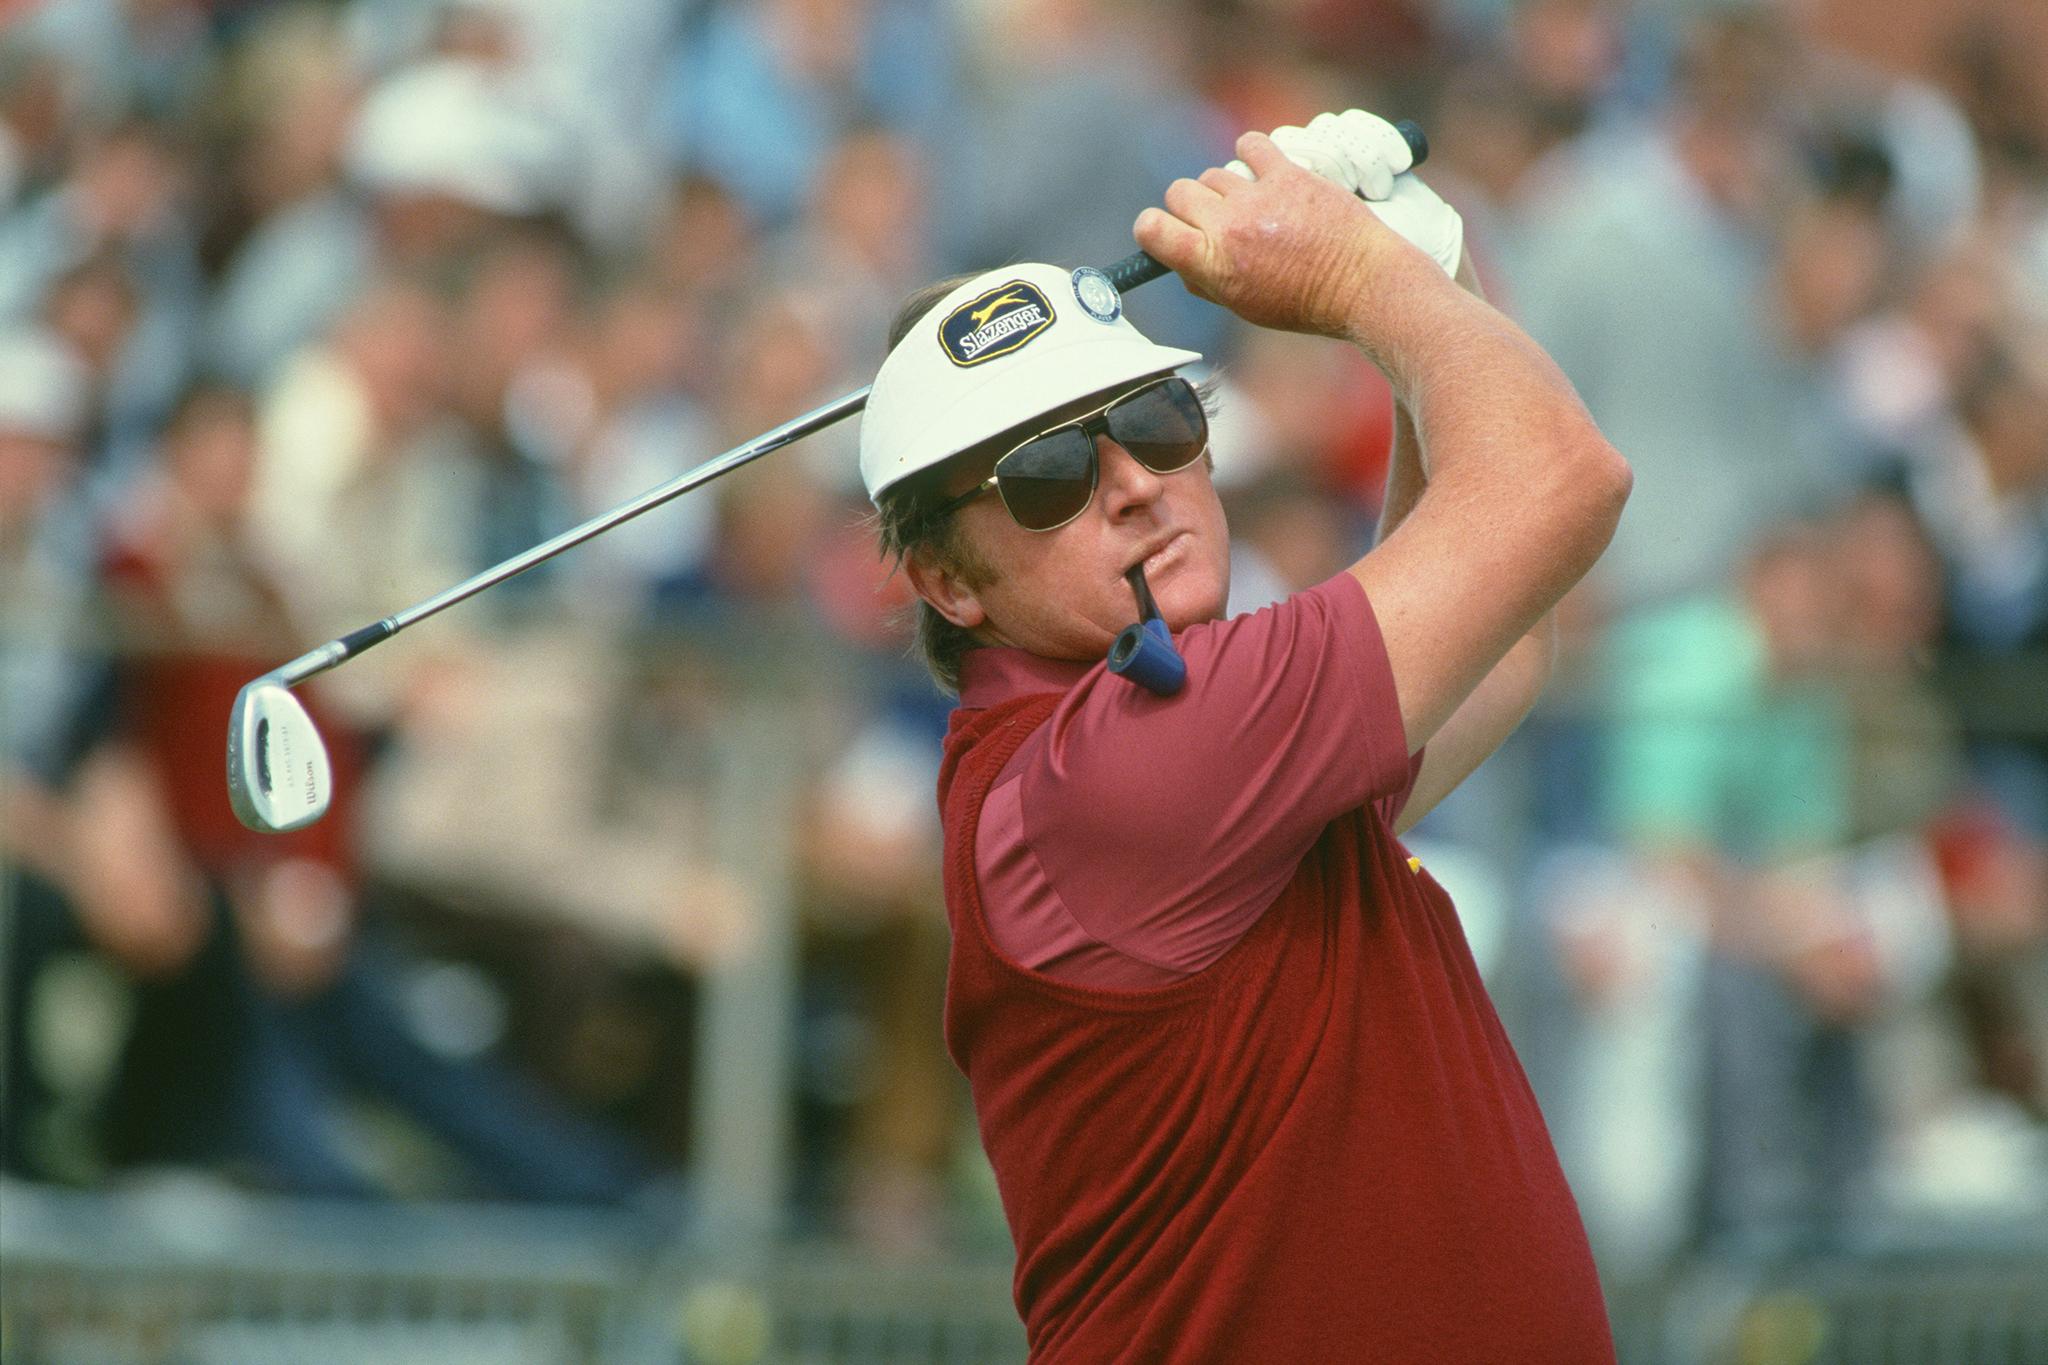 Barnes plays at the 1982 Open Championship at Royal Troon Golf Club in Scotland